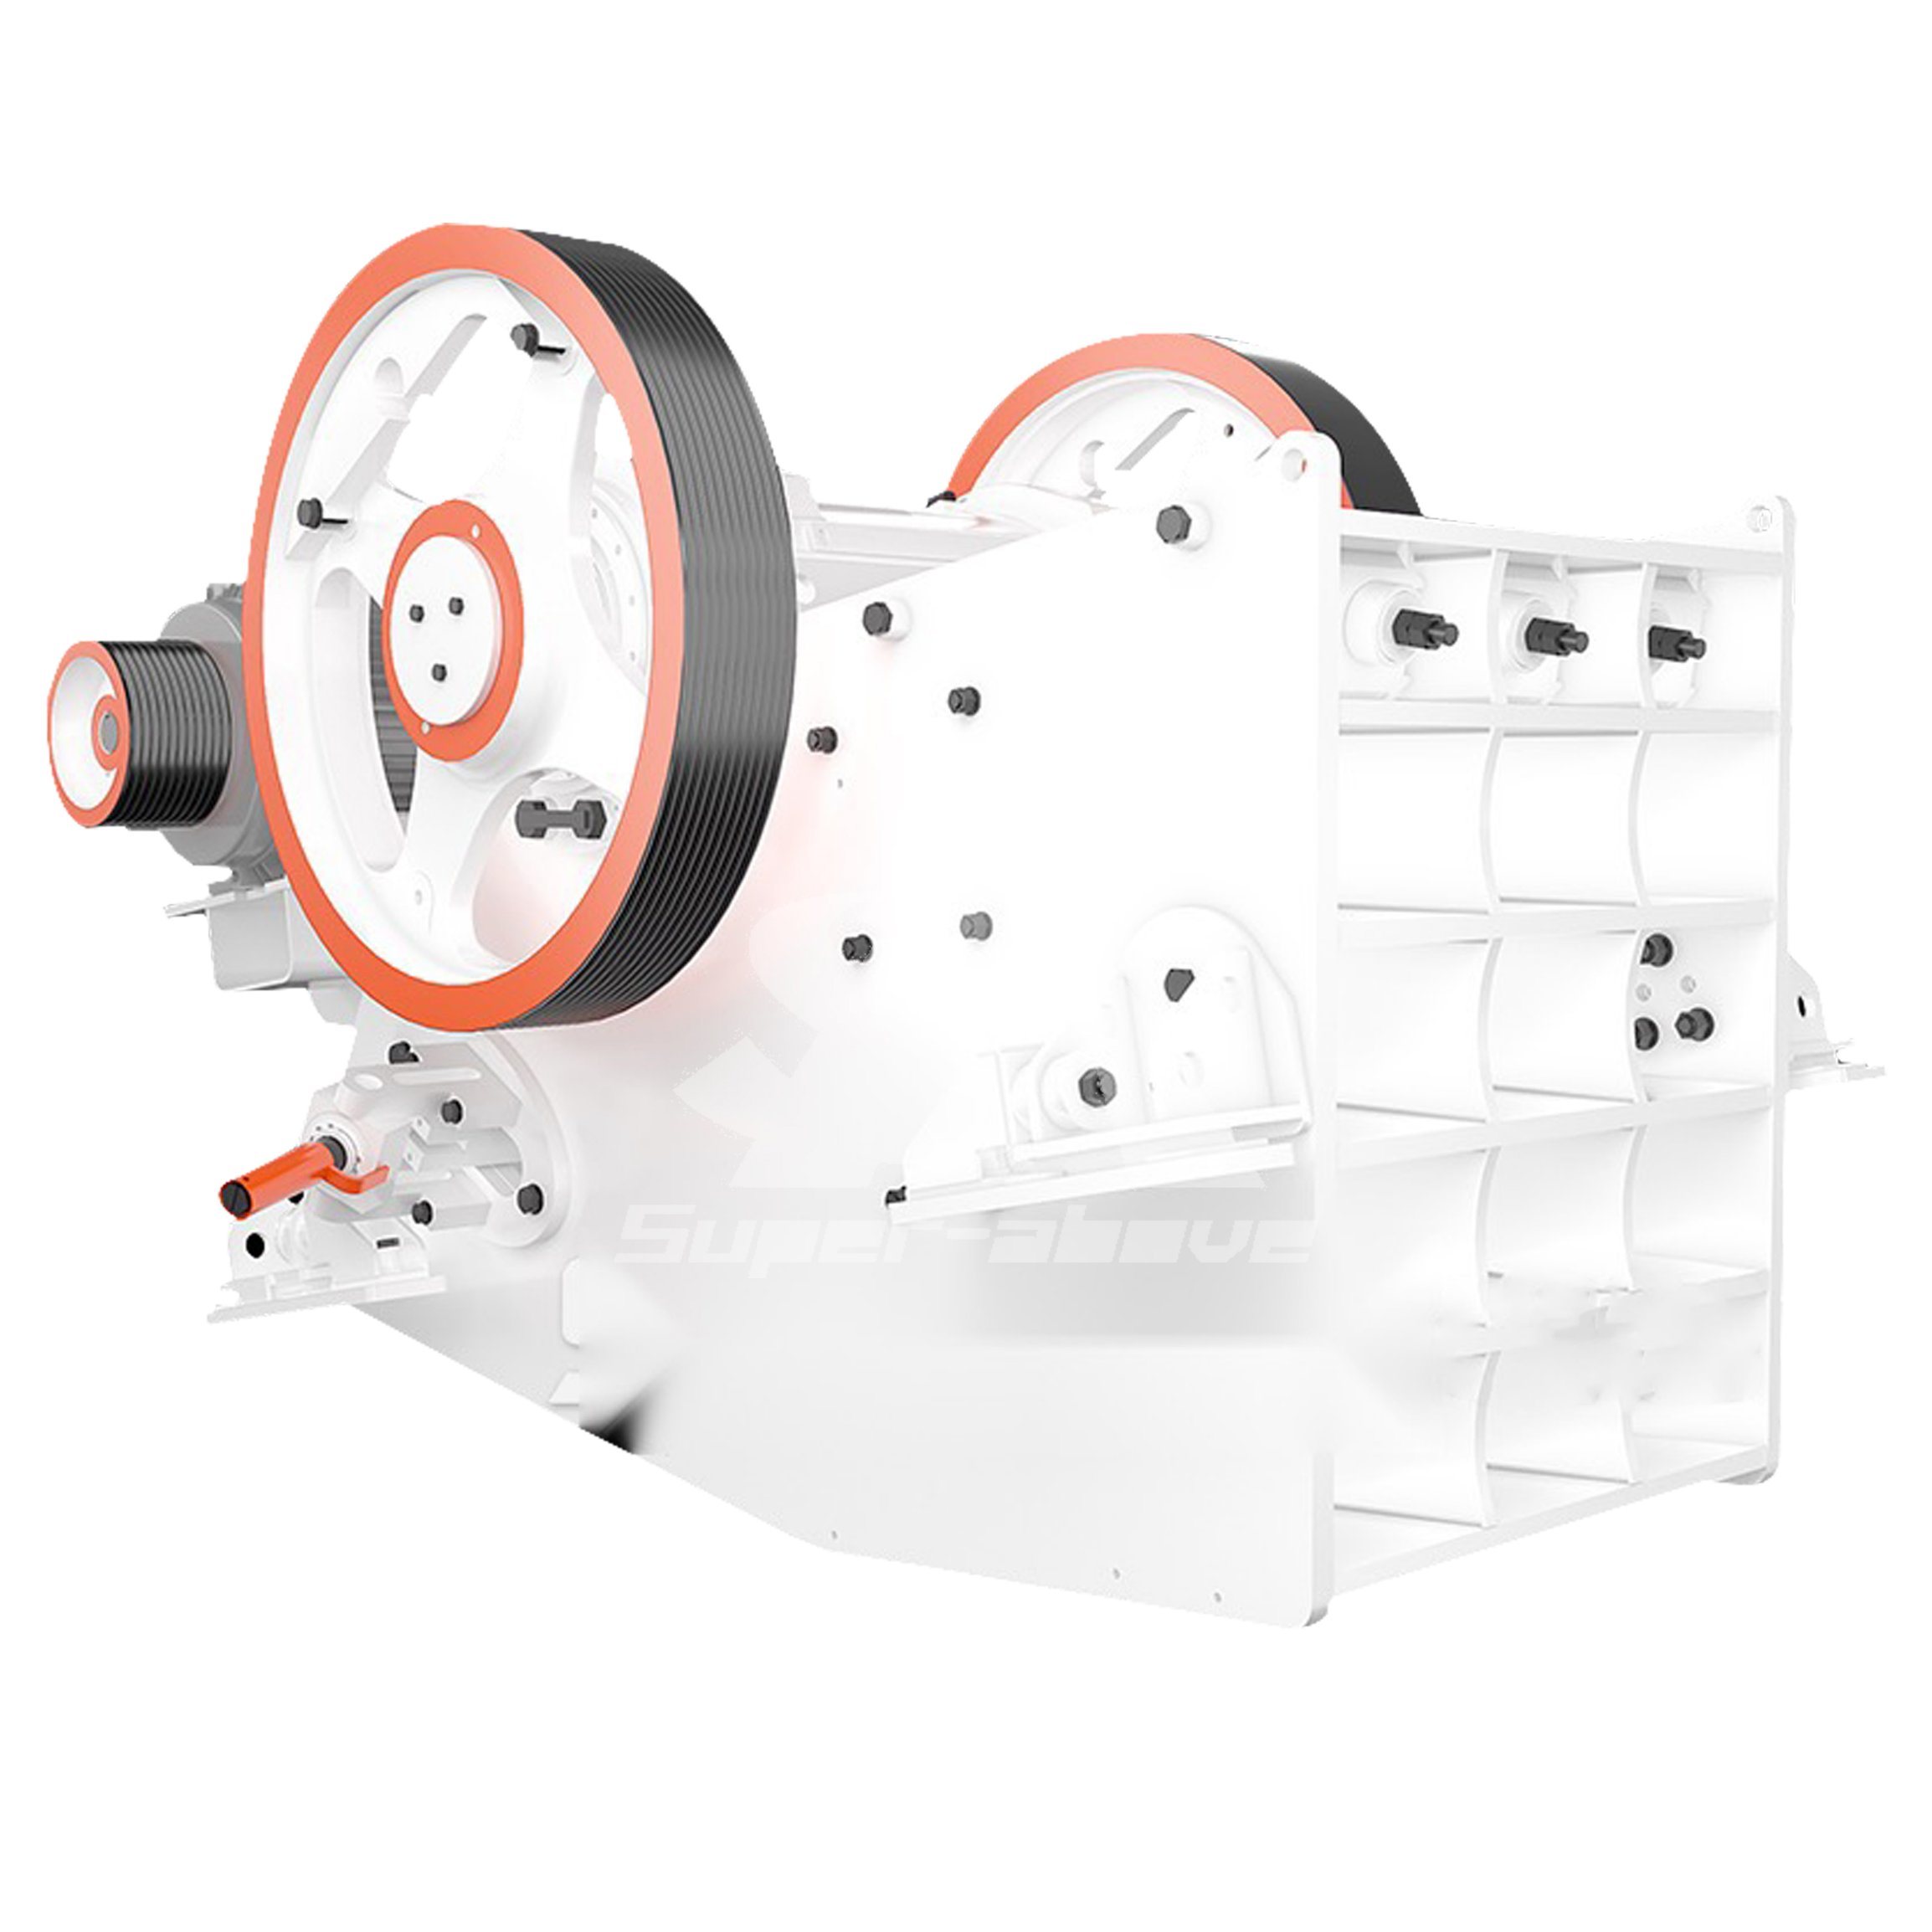 Rock Jaw Crusher with Electric Power